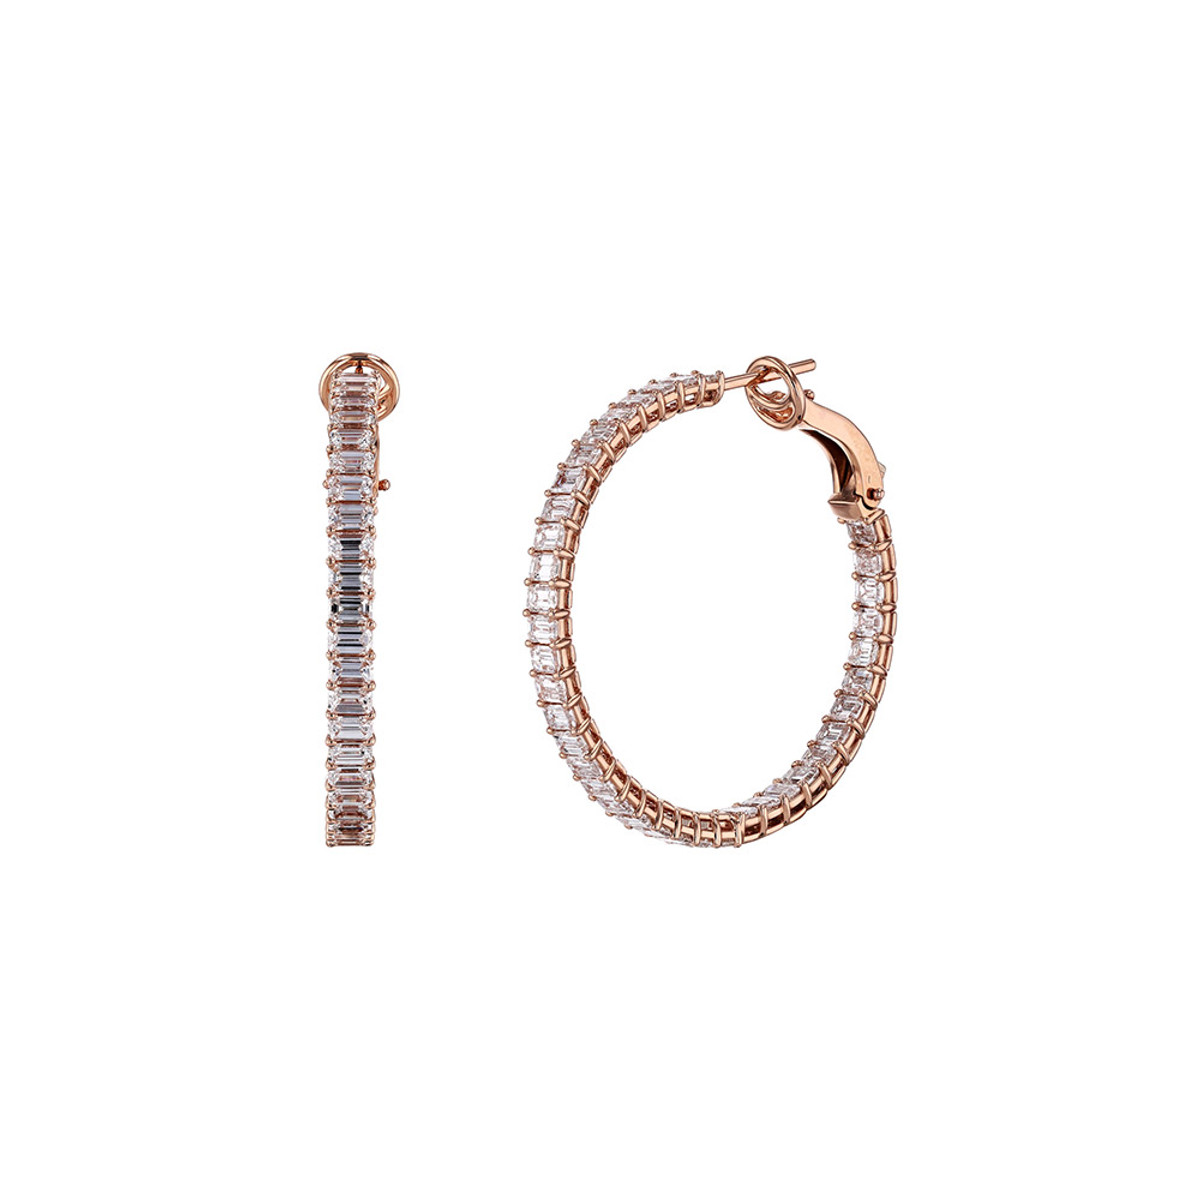 Hyde Park Collection 18 K Rose Gold Diamond Hoop Earrings-59196 Product Image